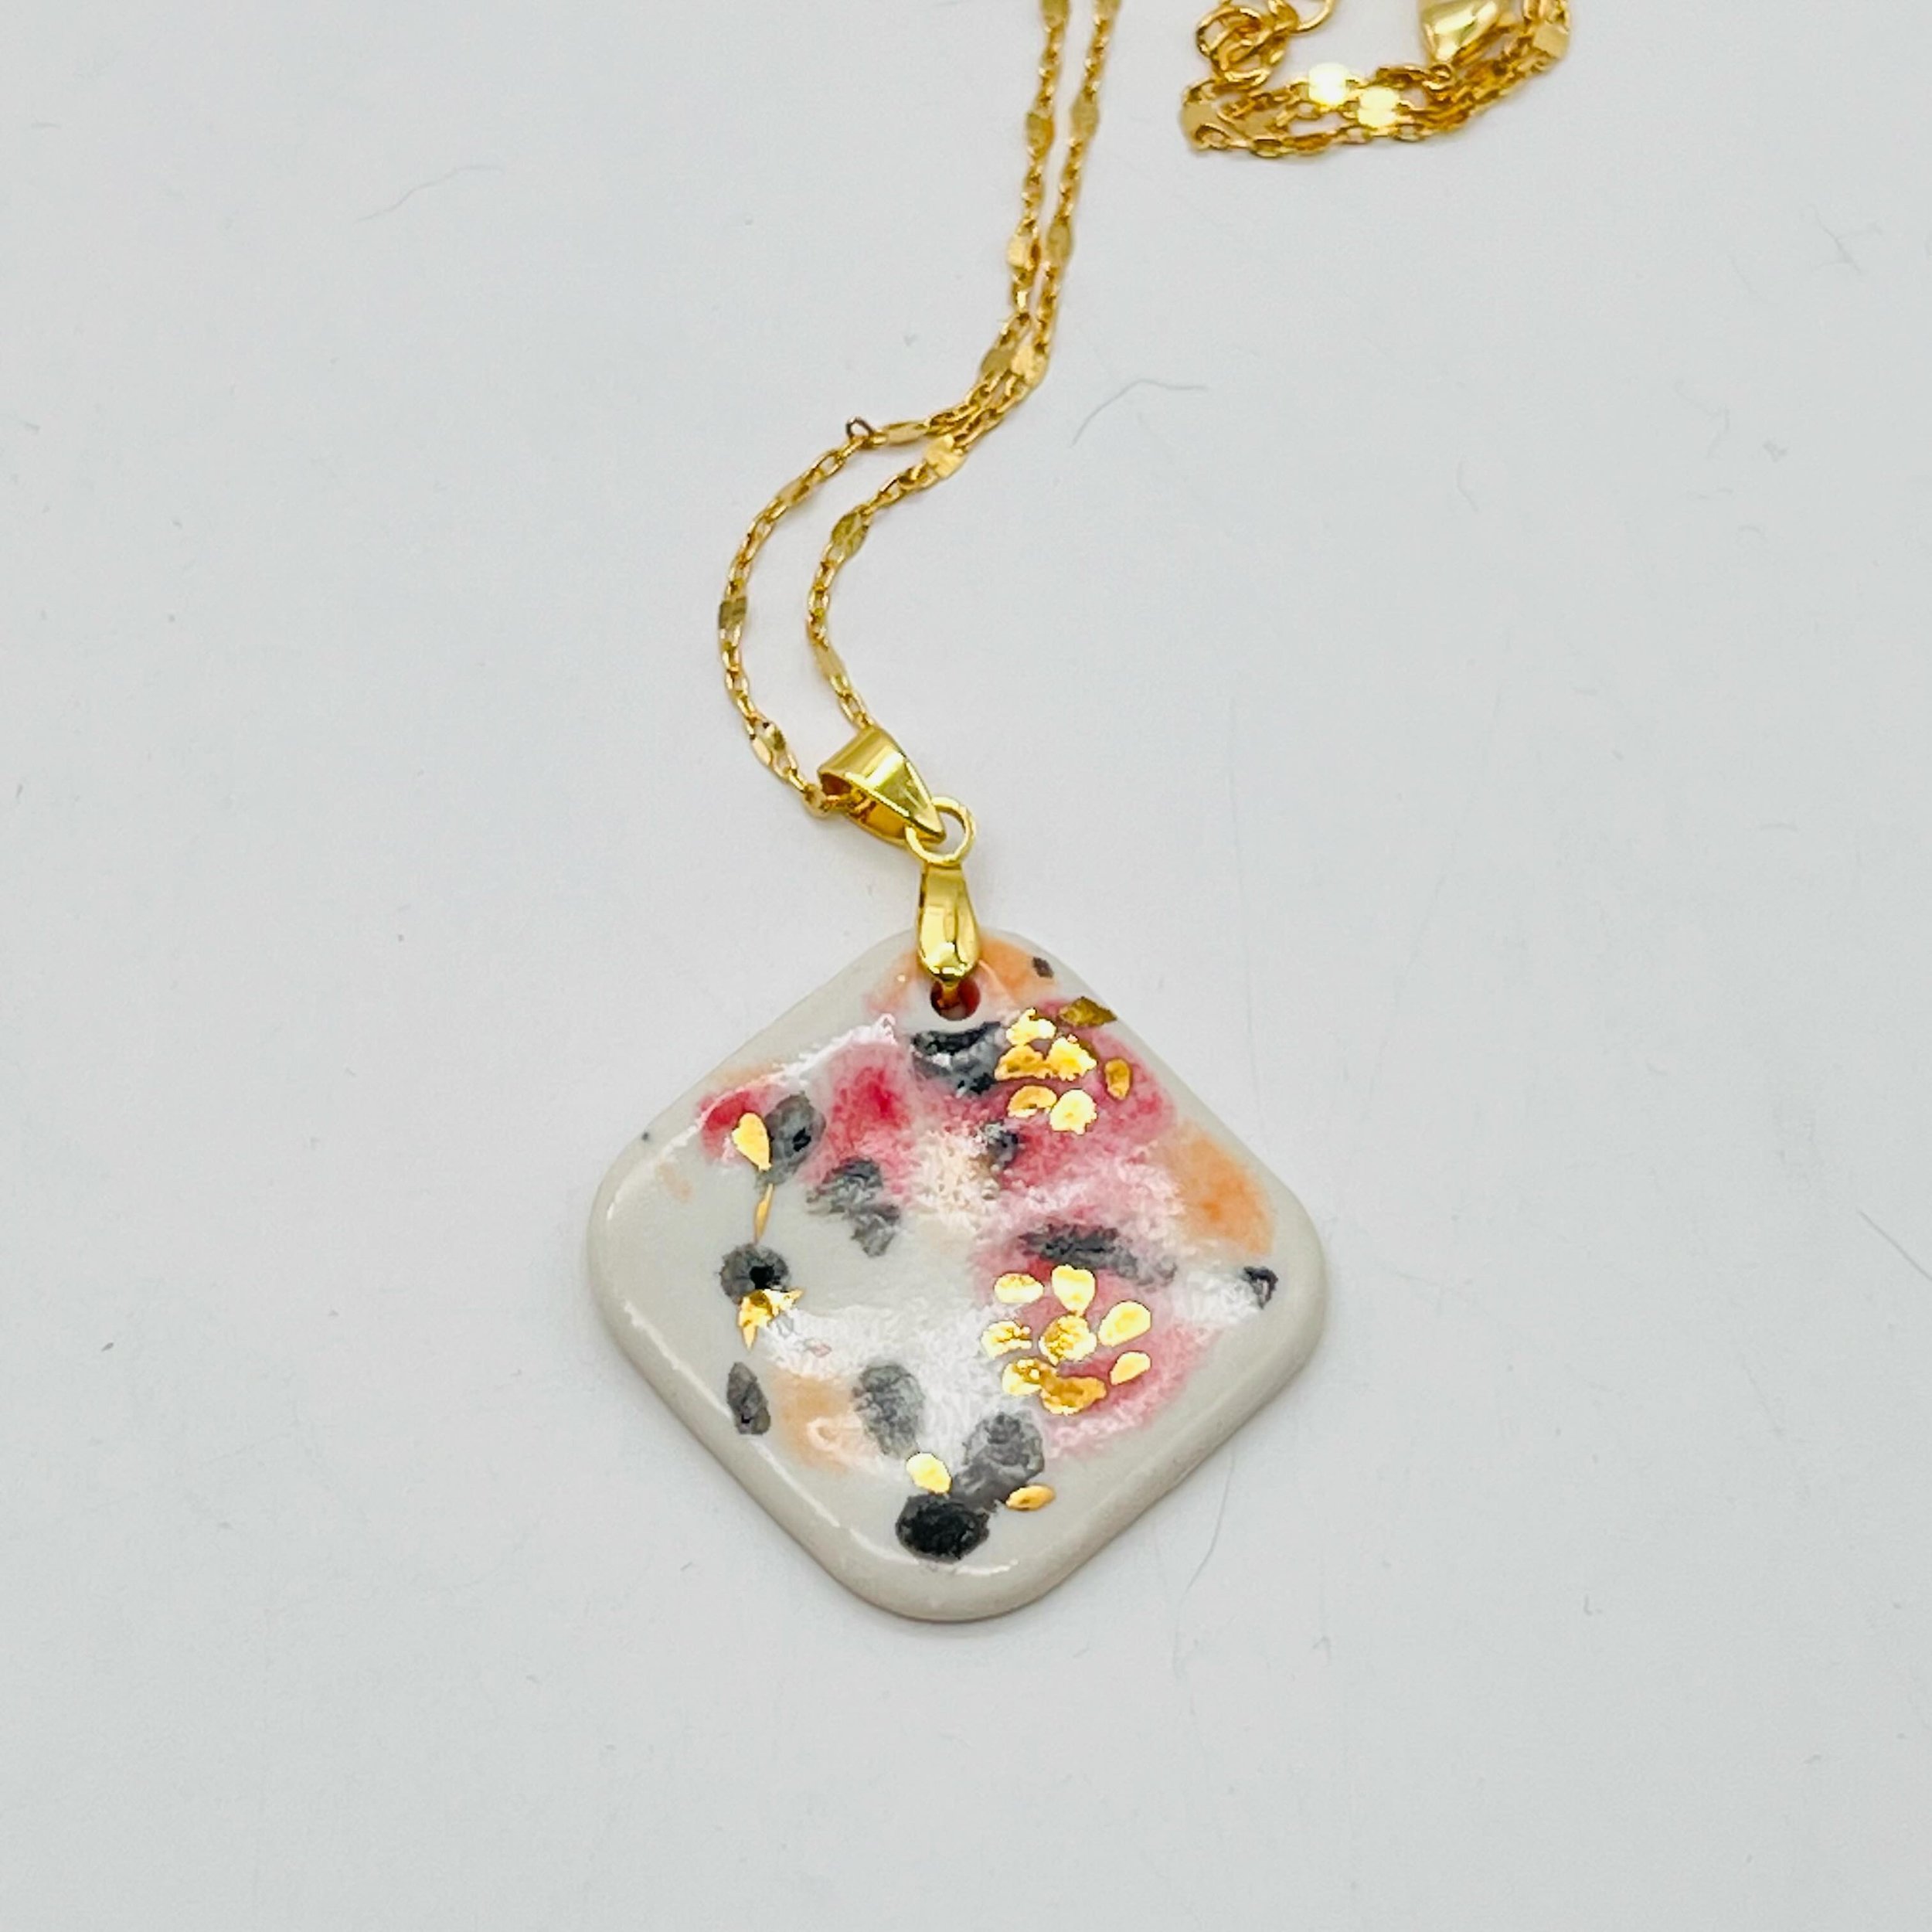 I am thrilled to see how this pendant turned out! Thanks to my friend @gardenhomeva for letting me borrow her necklace to pair with it and encouraging me to stick with my vision. 
.
.
.
#ceramicjewelry #ceramicjewels #porcelainjewelry #ceramicpendant